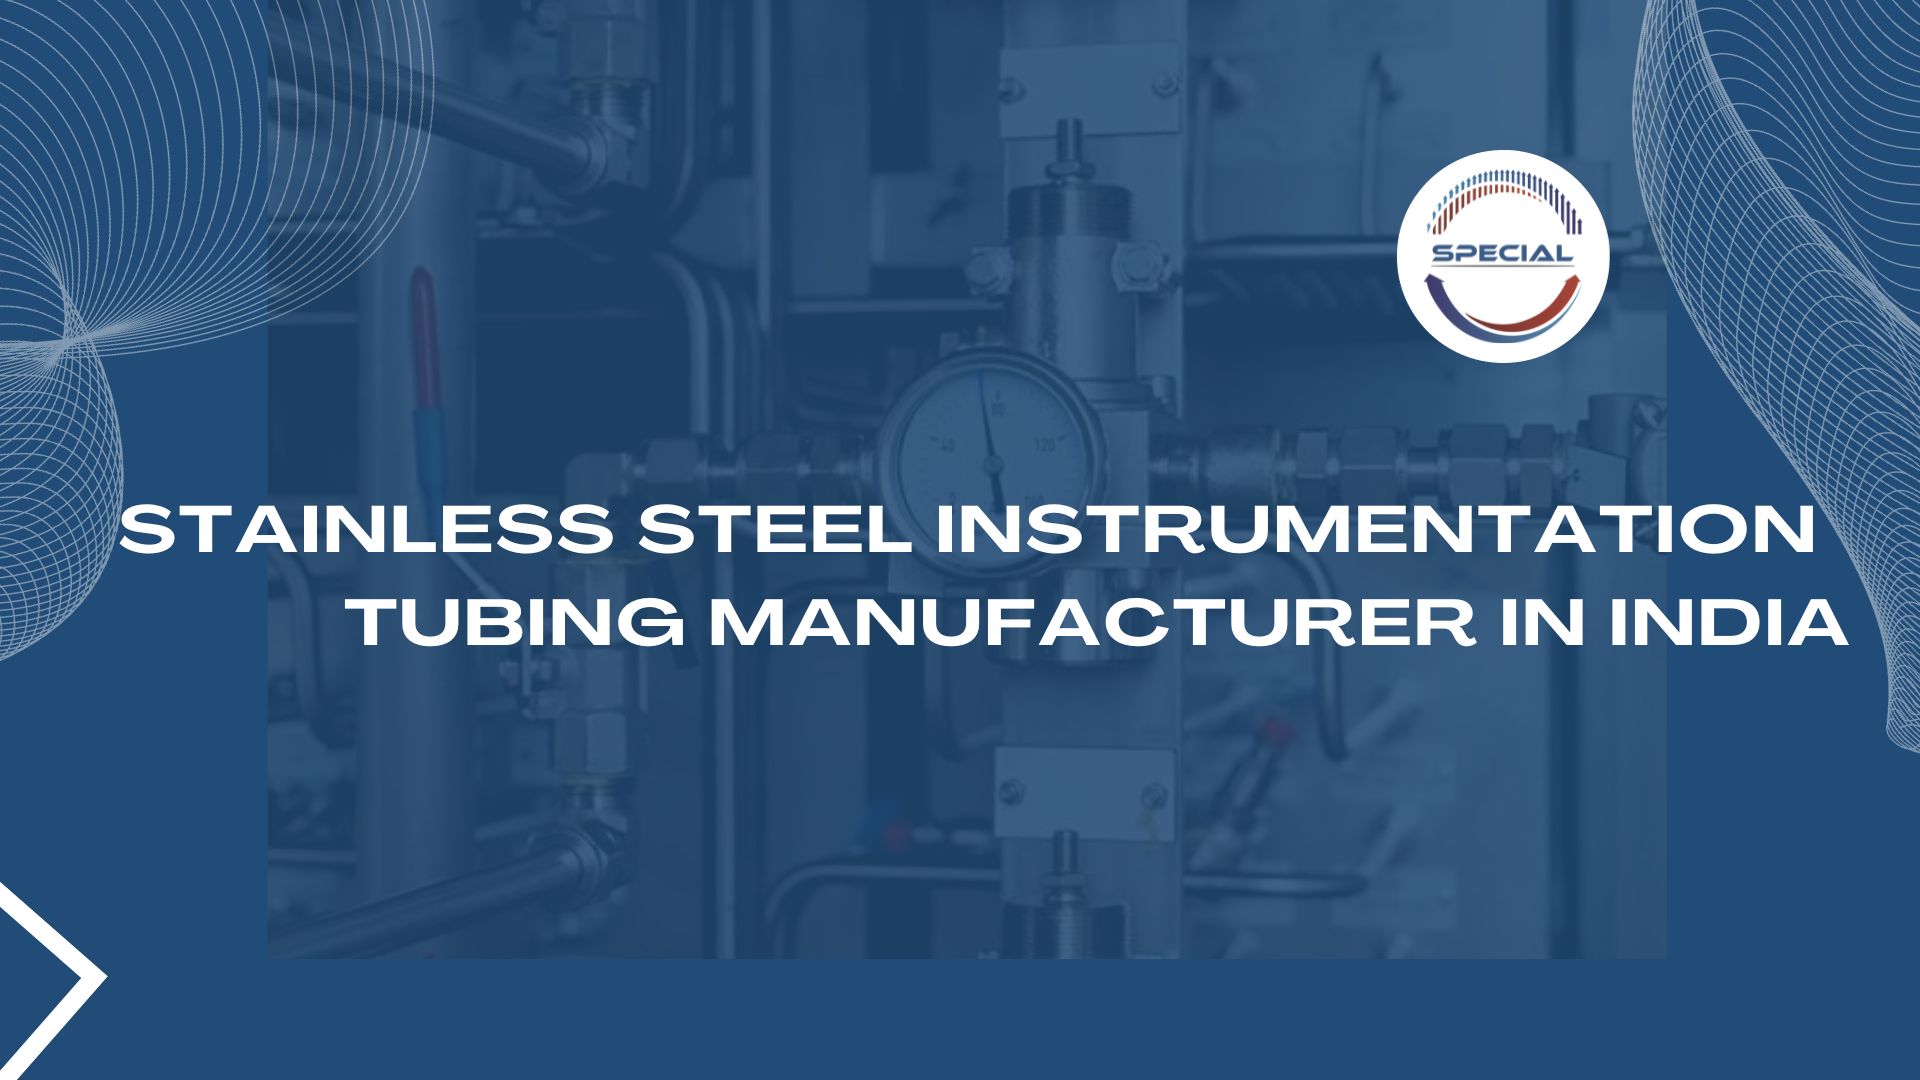 Stainless Steel Instrumentation Tubing Manufacturer in India